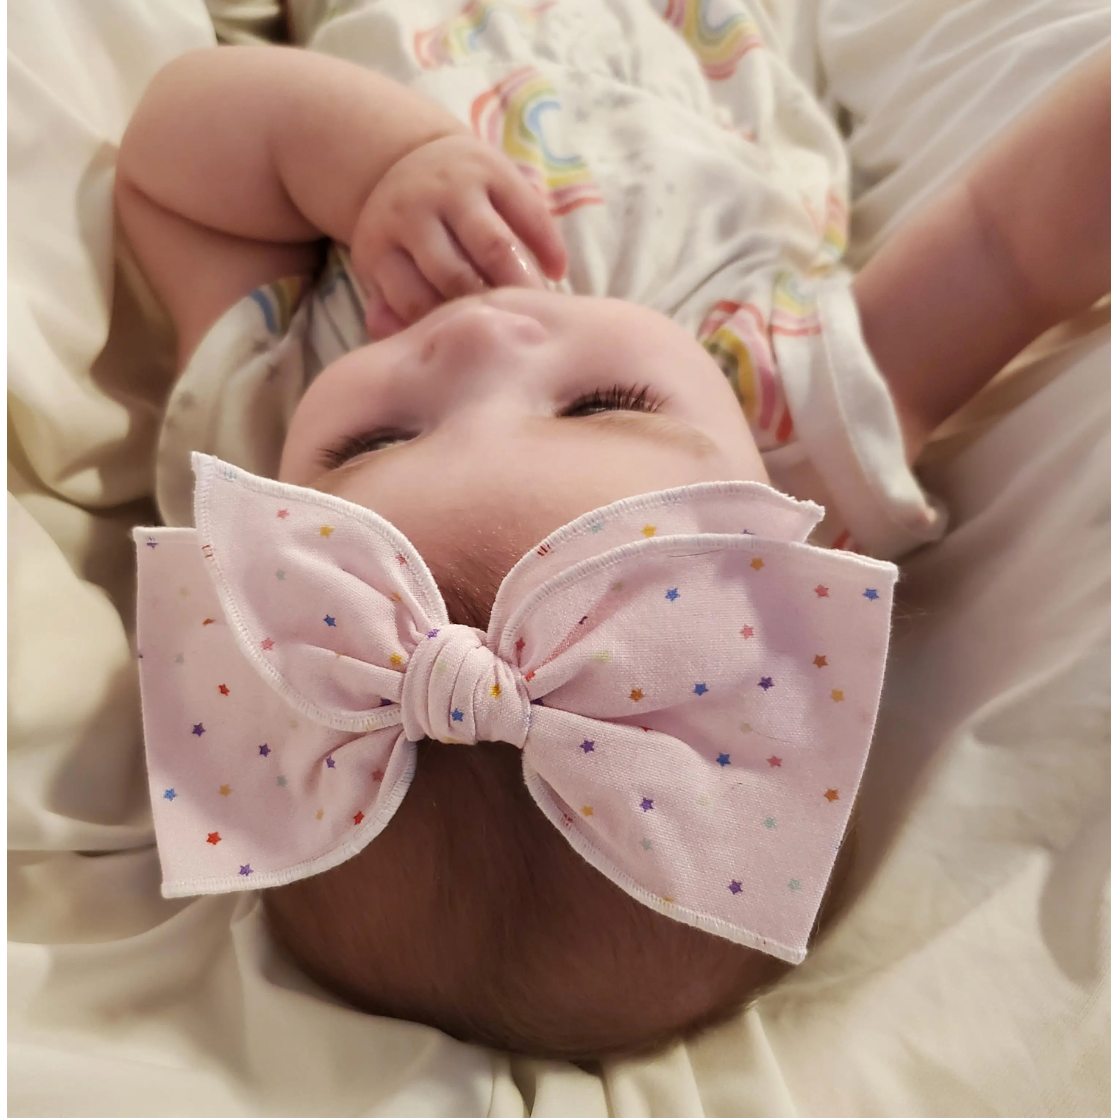 small hemmed-edge hair bow in pink stars